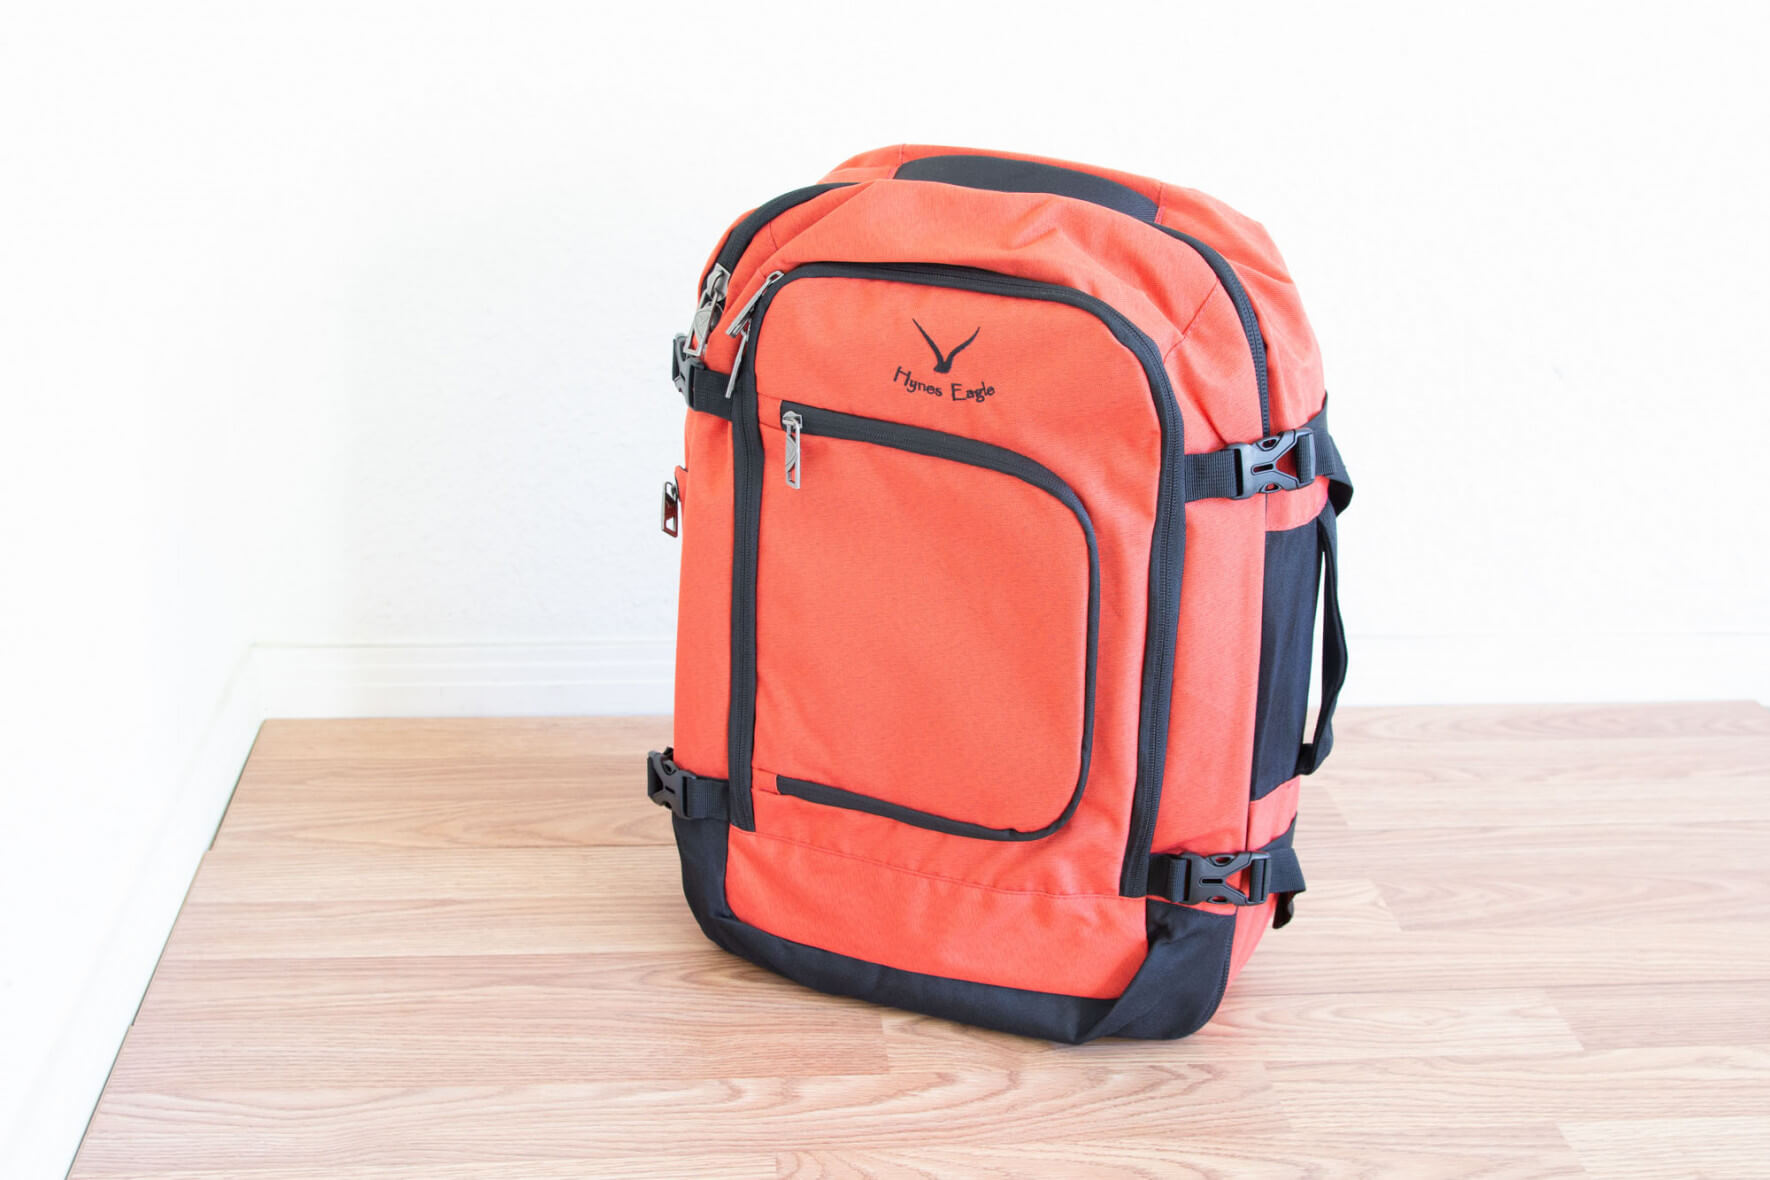 The Best Carry On Backpack of 2020 - Hynes Solo 885x590@2x